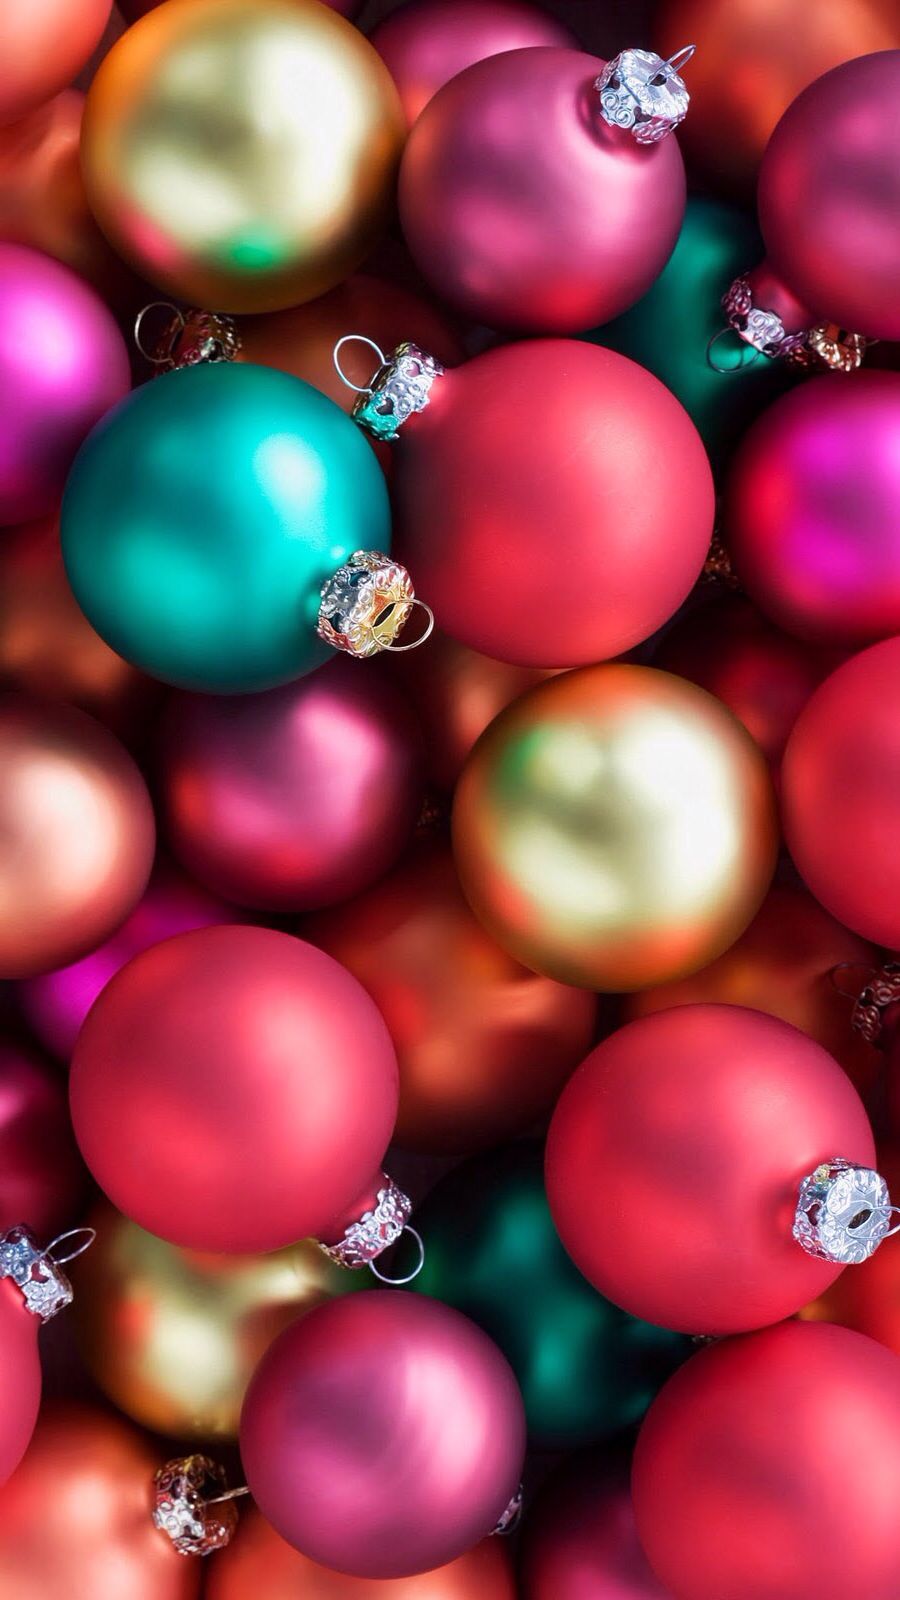 Christmas Ornaments iPhone Wallpaper Free Christmas Ornaments iPhone Background